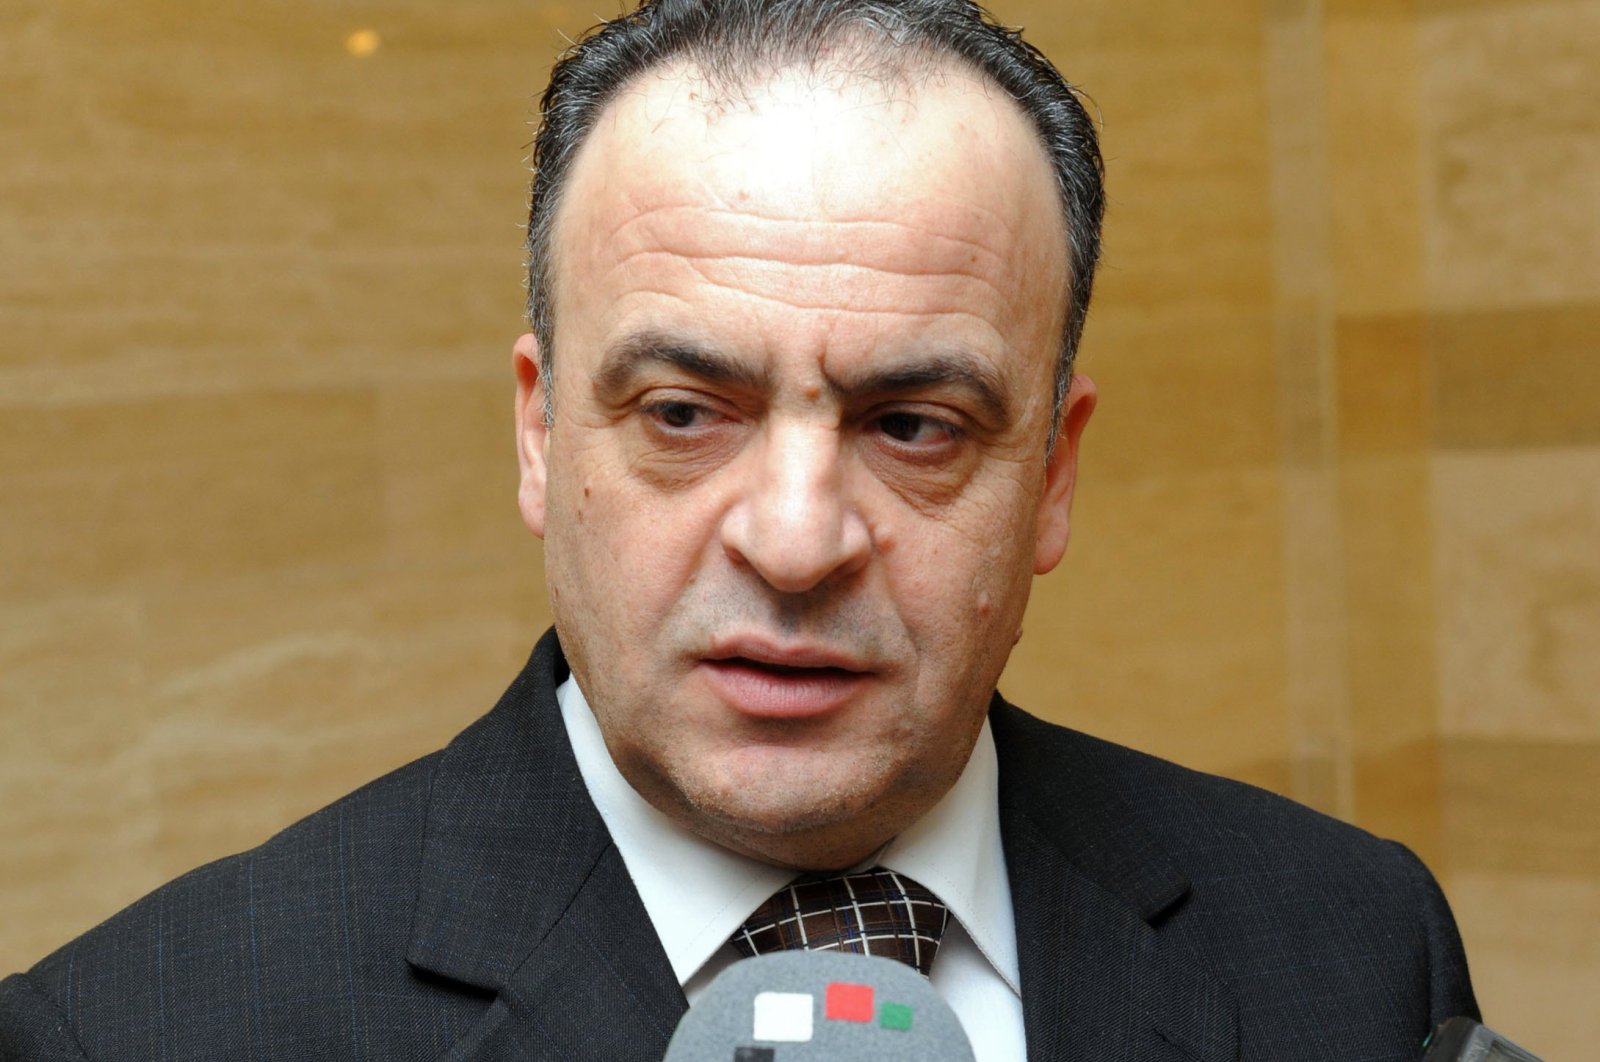 Then-electricity minister Imad Khamis answering journalists' questions following a meeting in the Syrian capital Damascus, January 16, 2014.